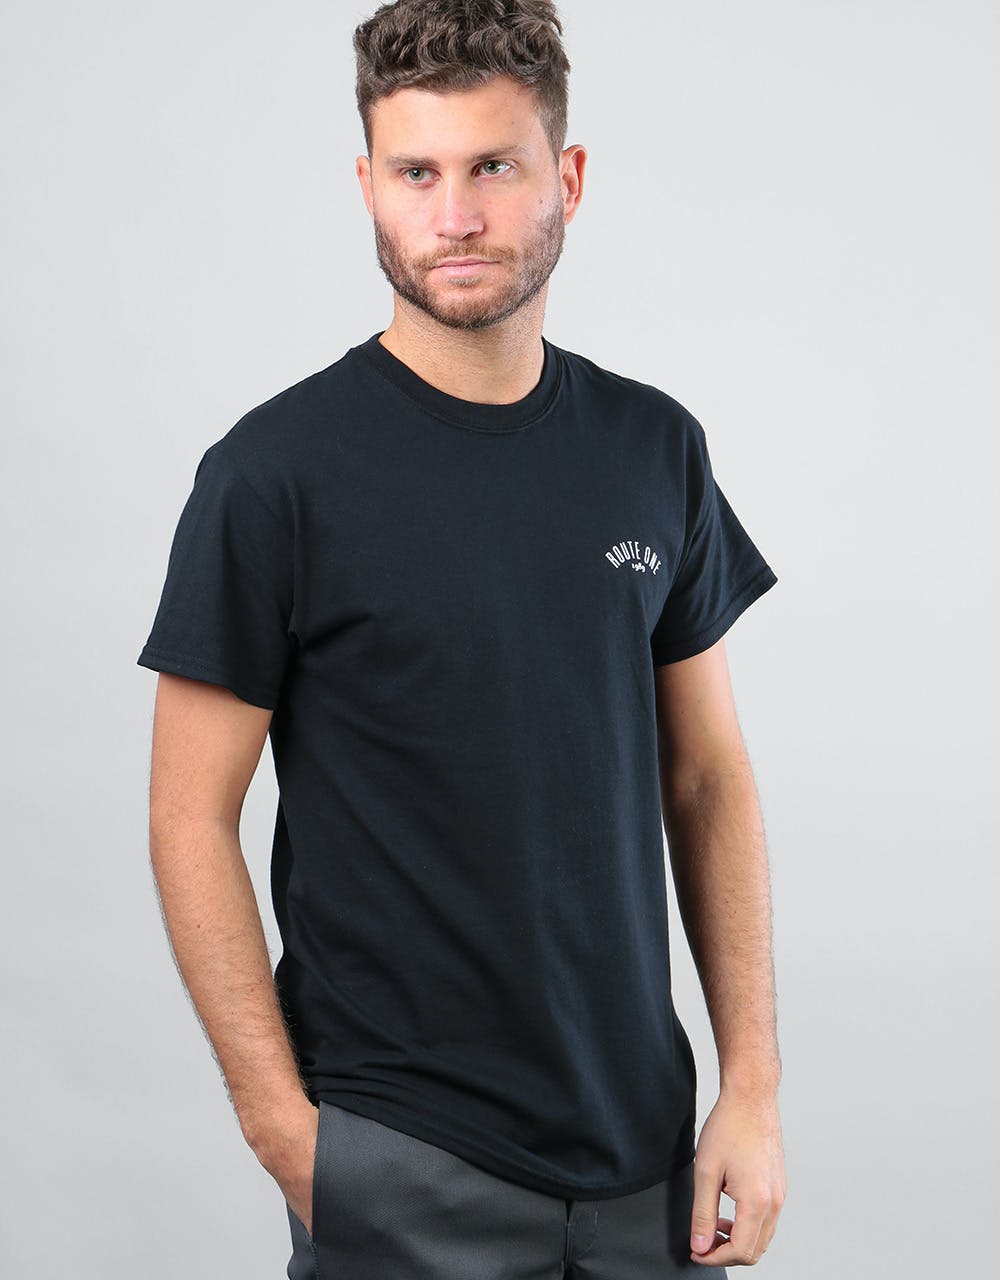 Route One Four Corners T-Shirt - Black